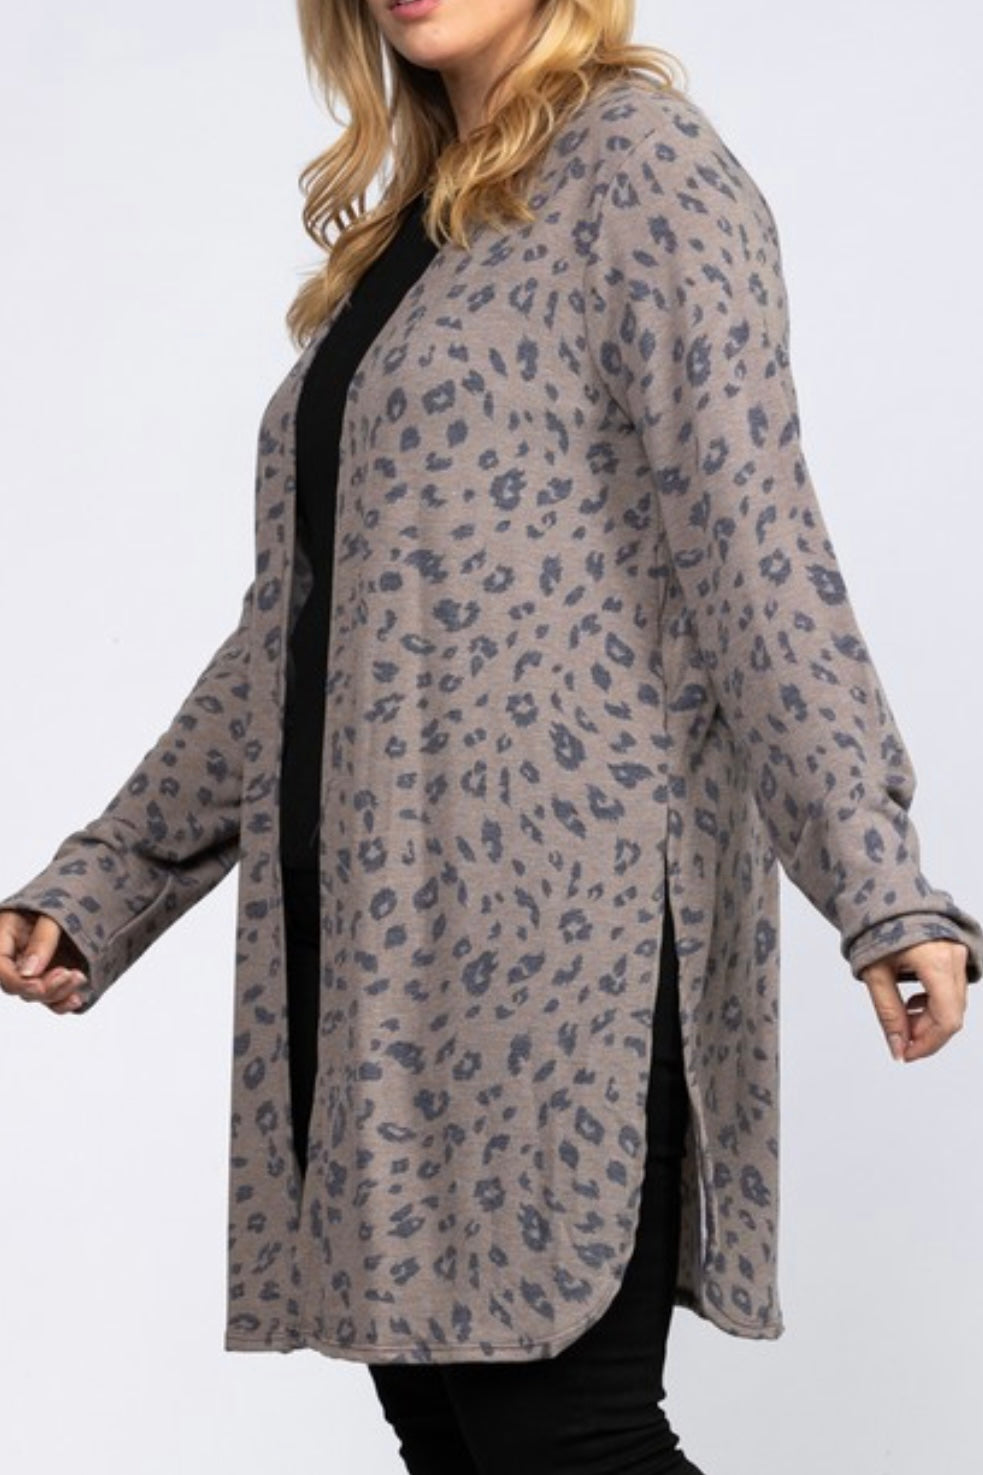 CURVY LEOPARD PRINT OPEN CARDI WITH SIDE SLITS